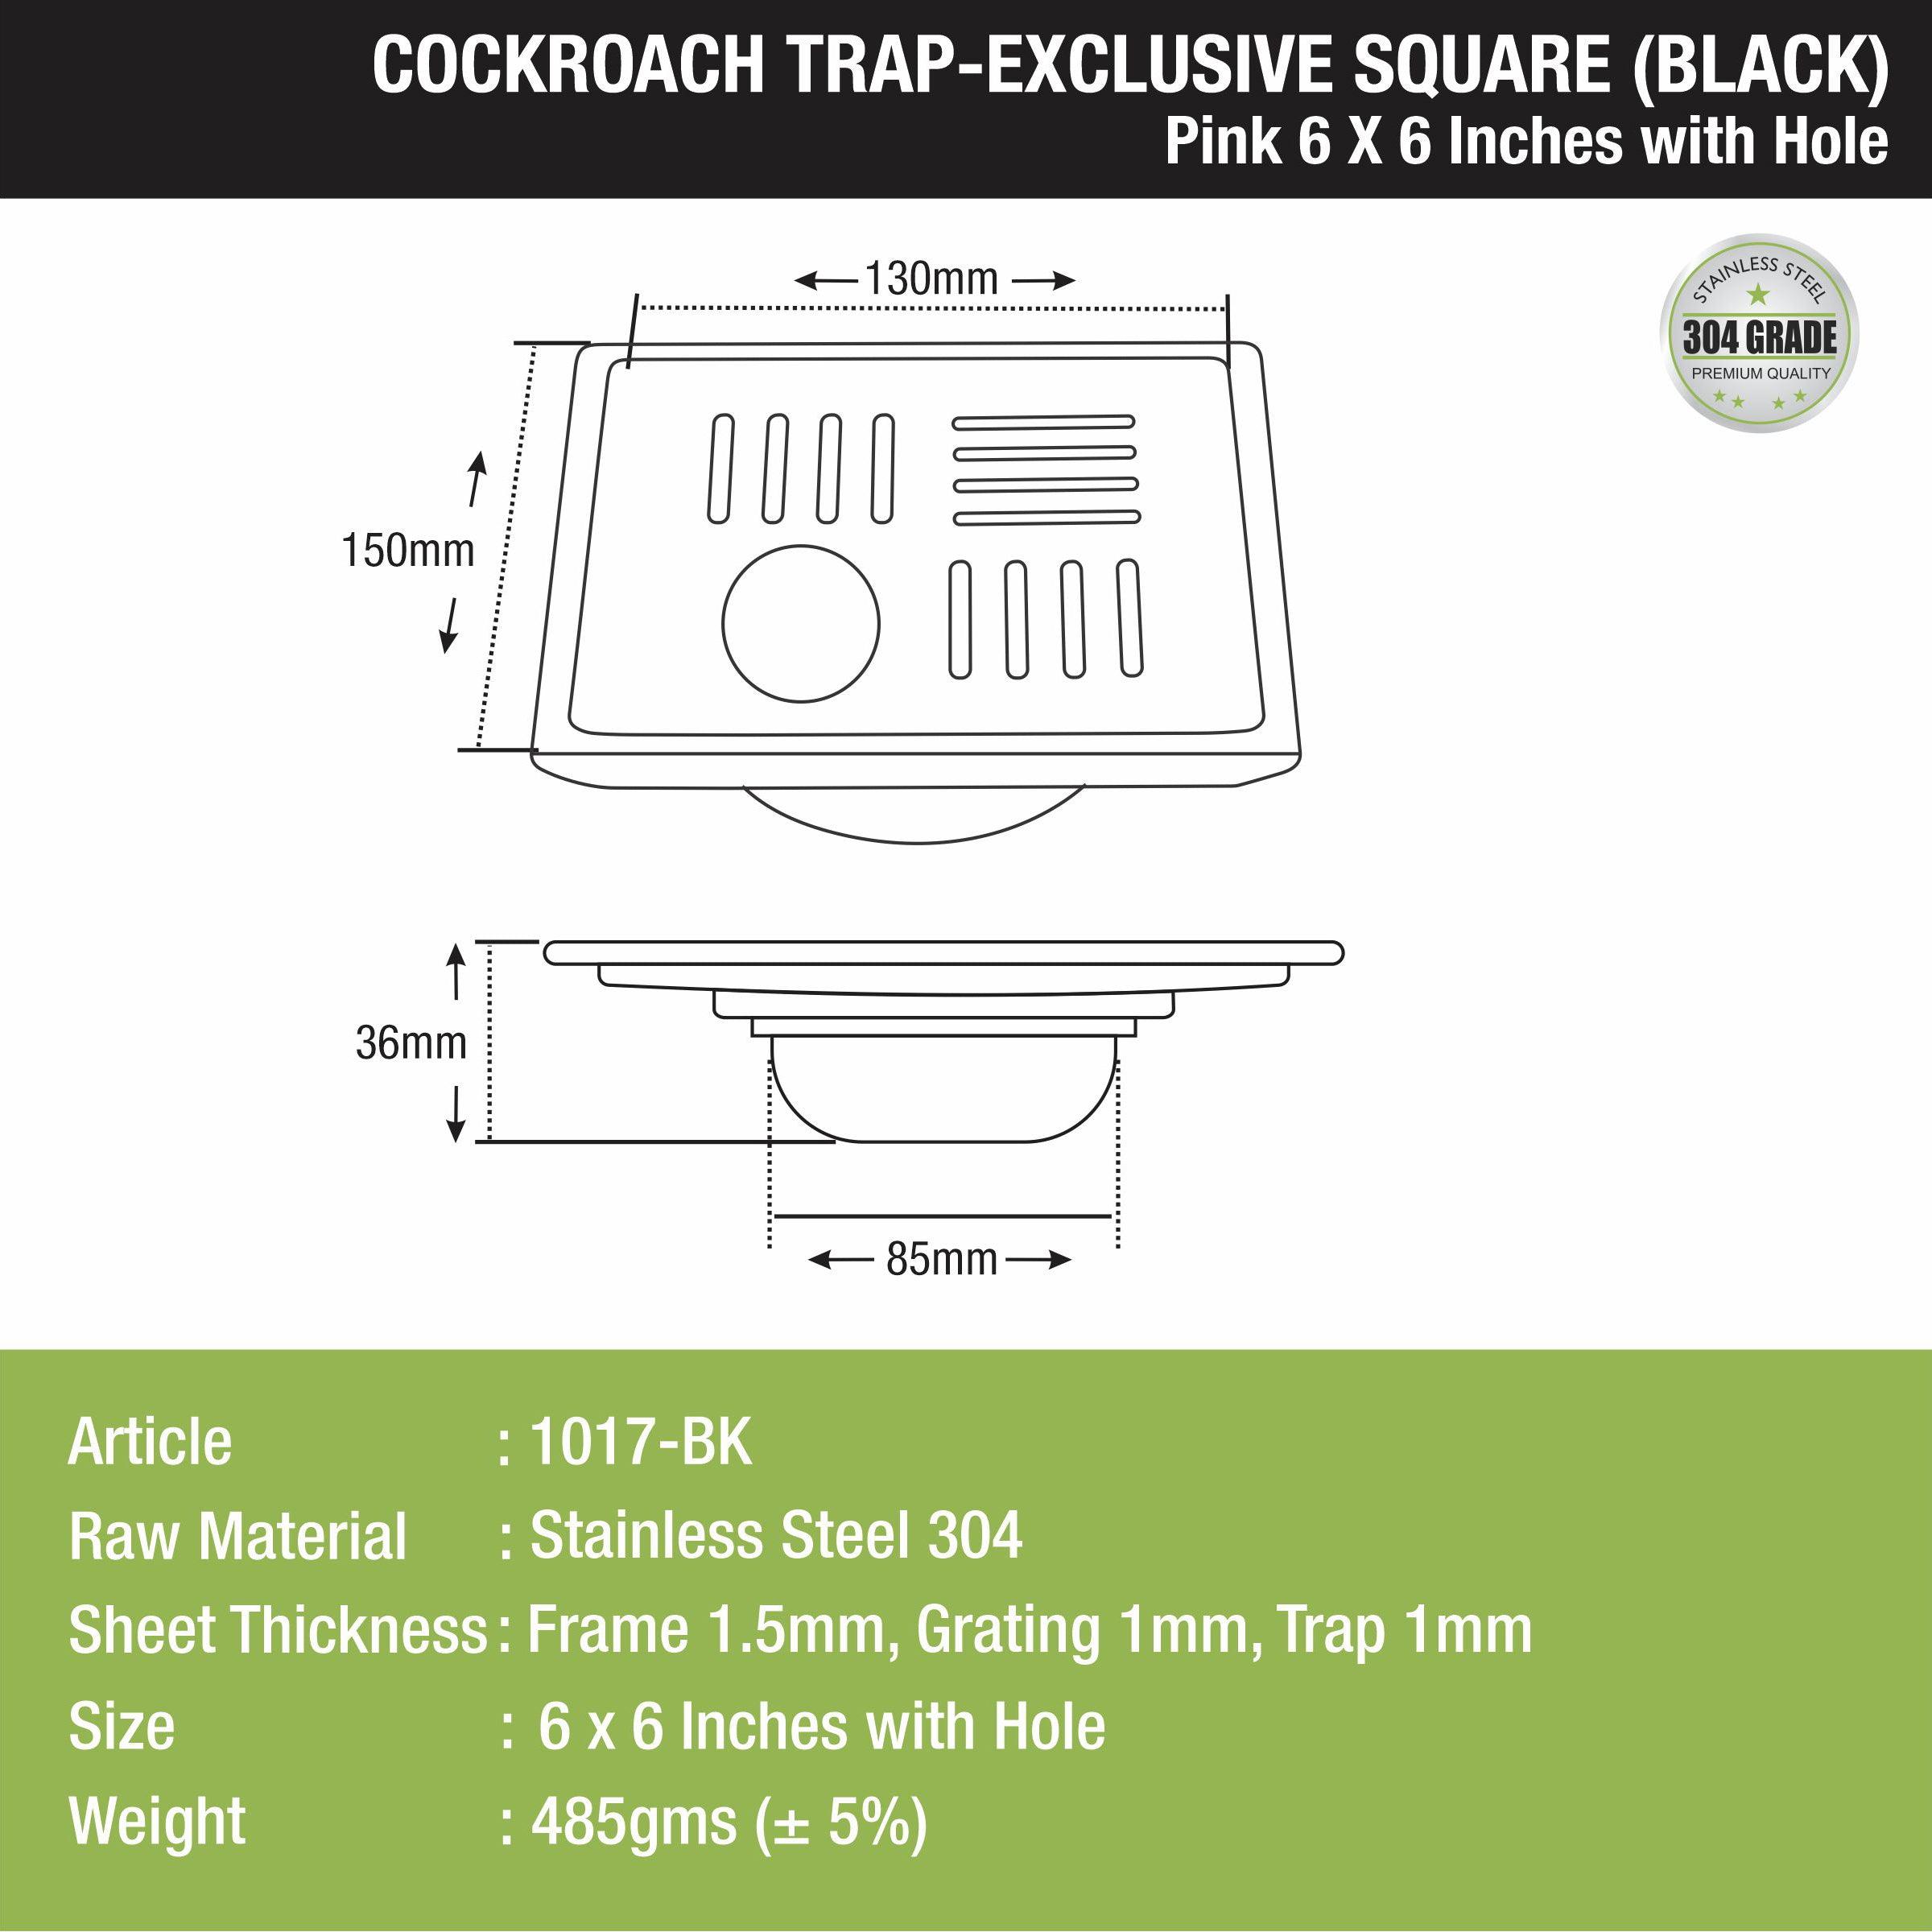 Pink Exclusive Square Floor Drain in Black PVD Coating (6 x 6 Inches) with Hole & Cockroach Trap size and measurement